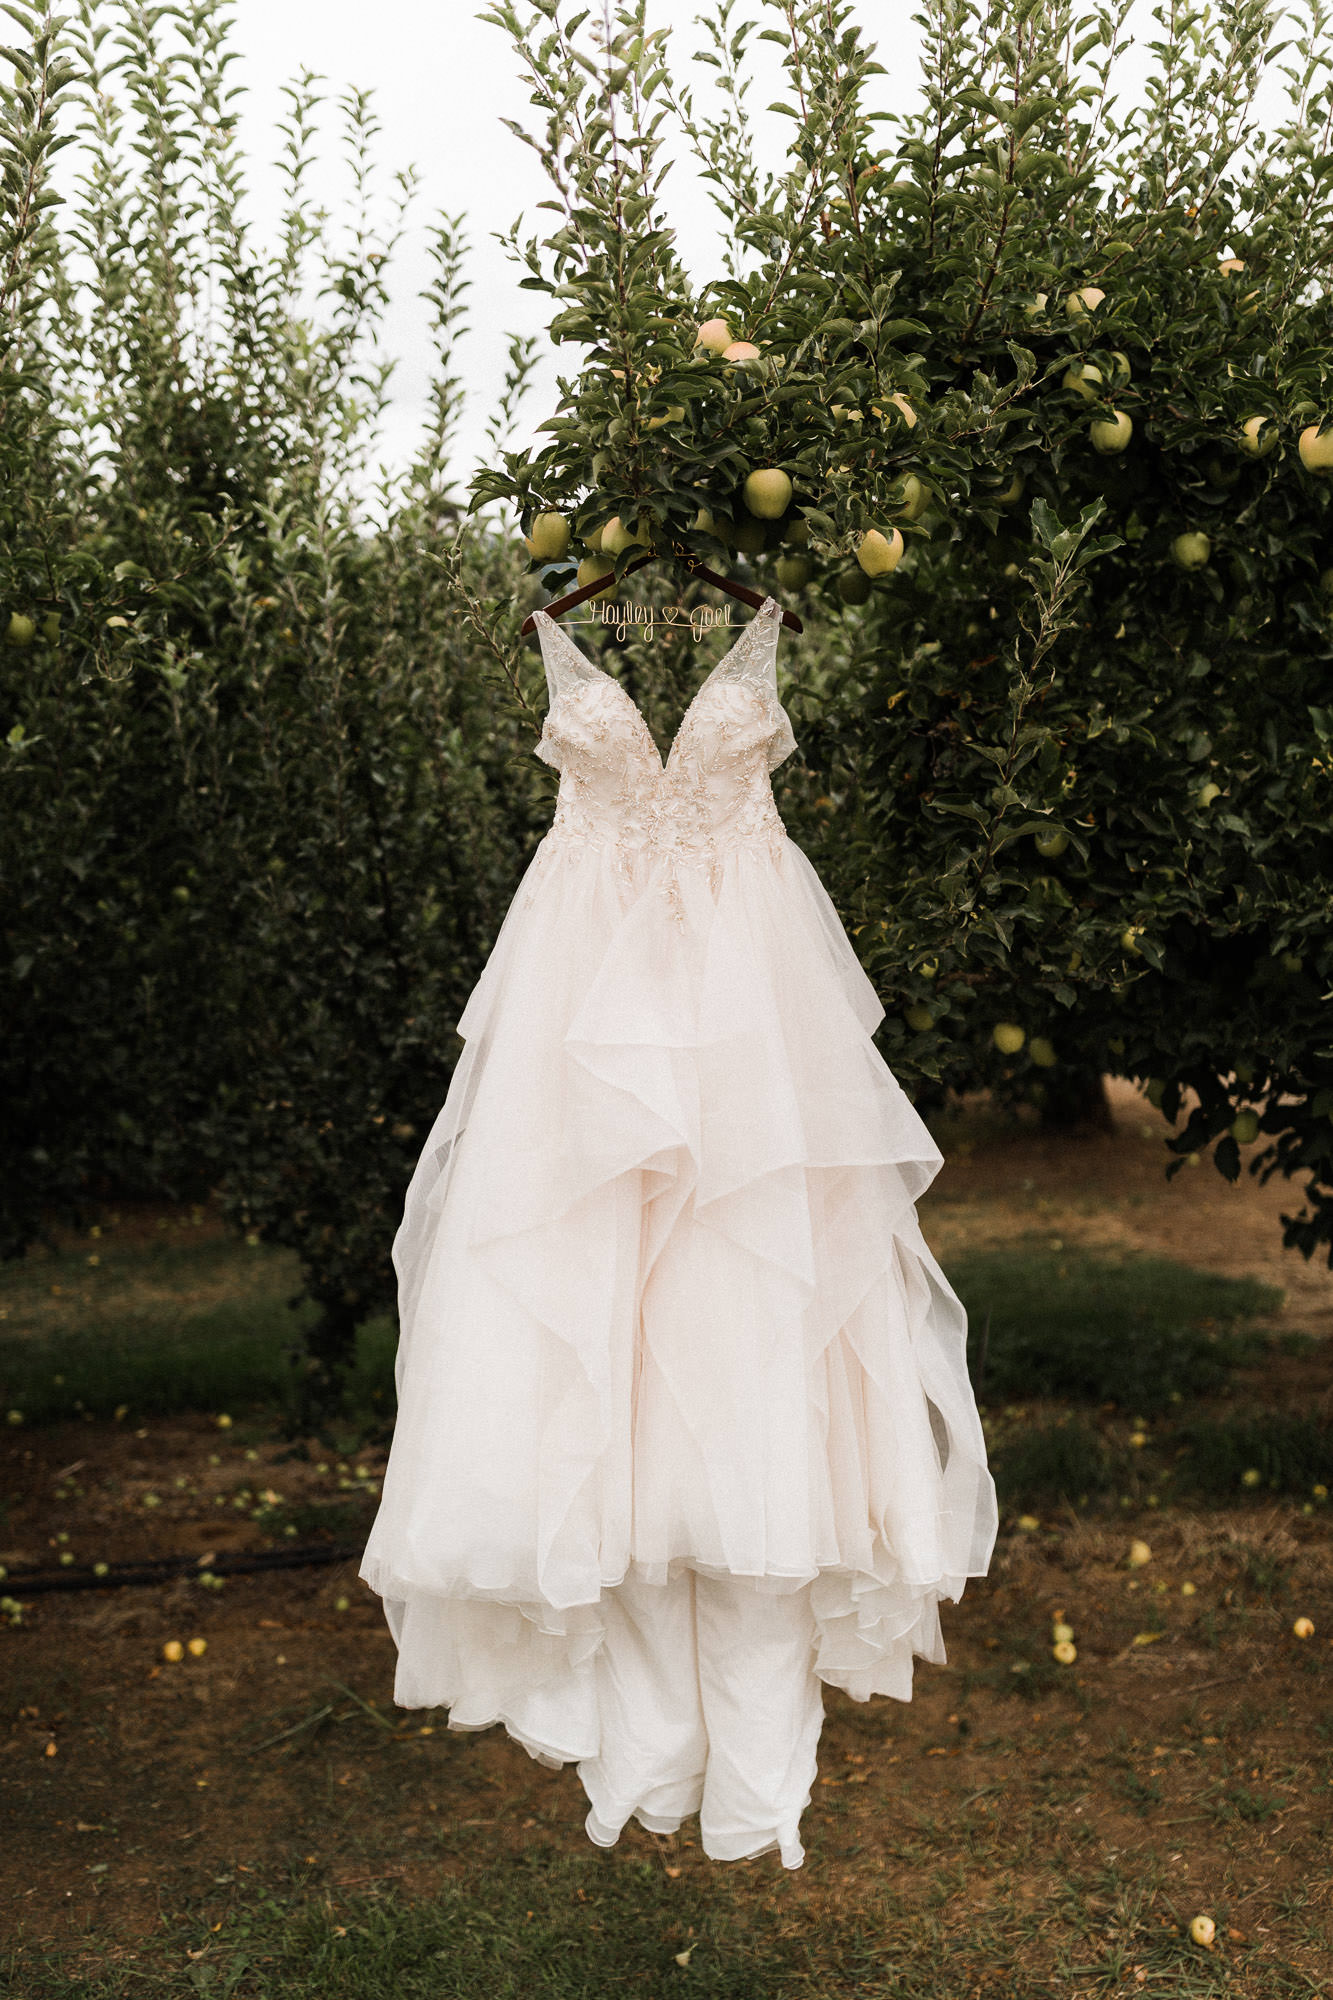 A wedding dress hangs from an apple tree at Mt. View Orchards near Hood River, Oregon.